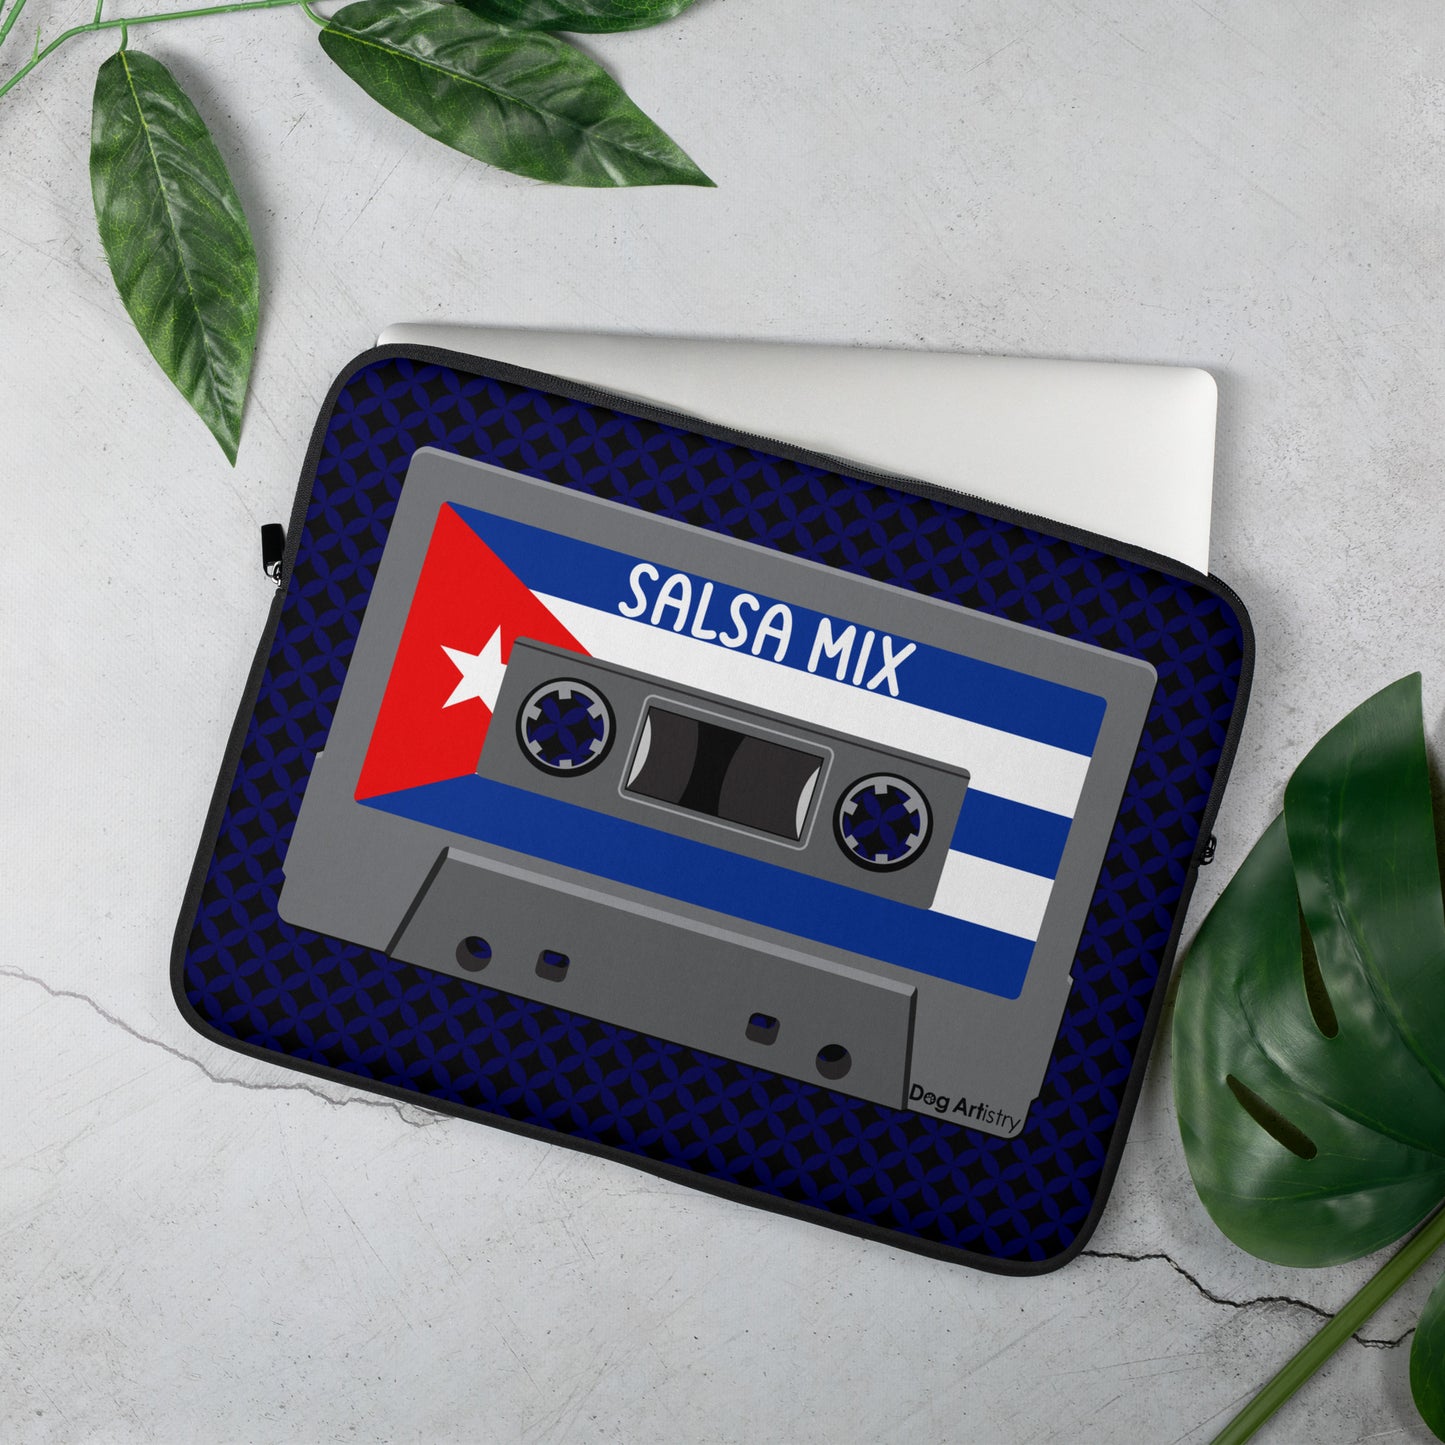 Cassette Tape Salsa music with Cuban flag on cassette laptop sleeve designed by Dog Artistry.